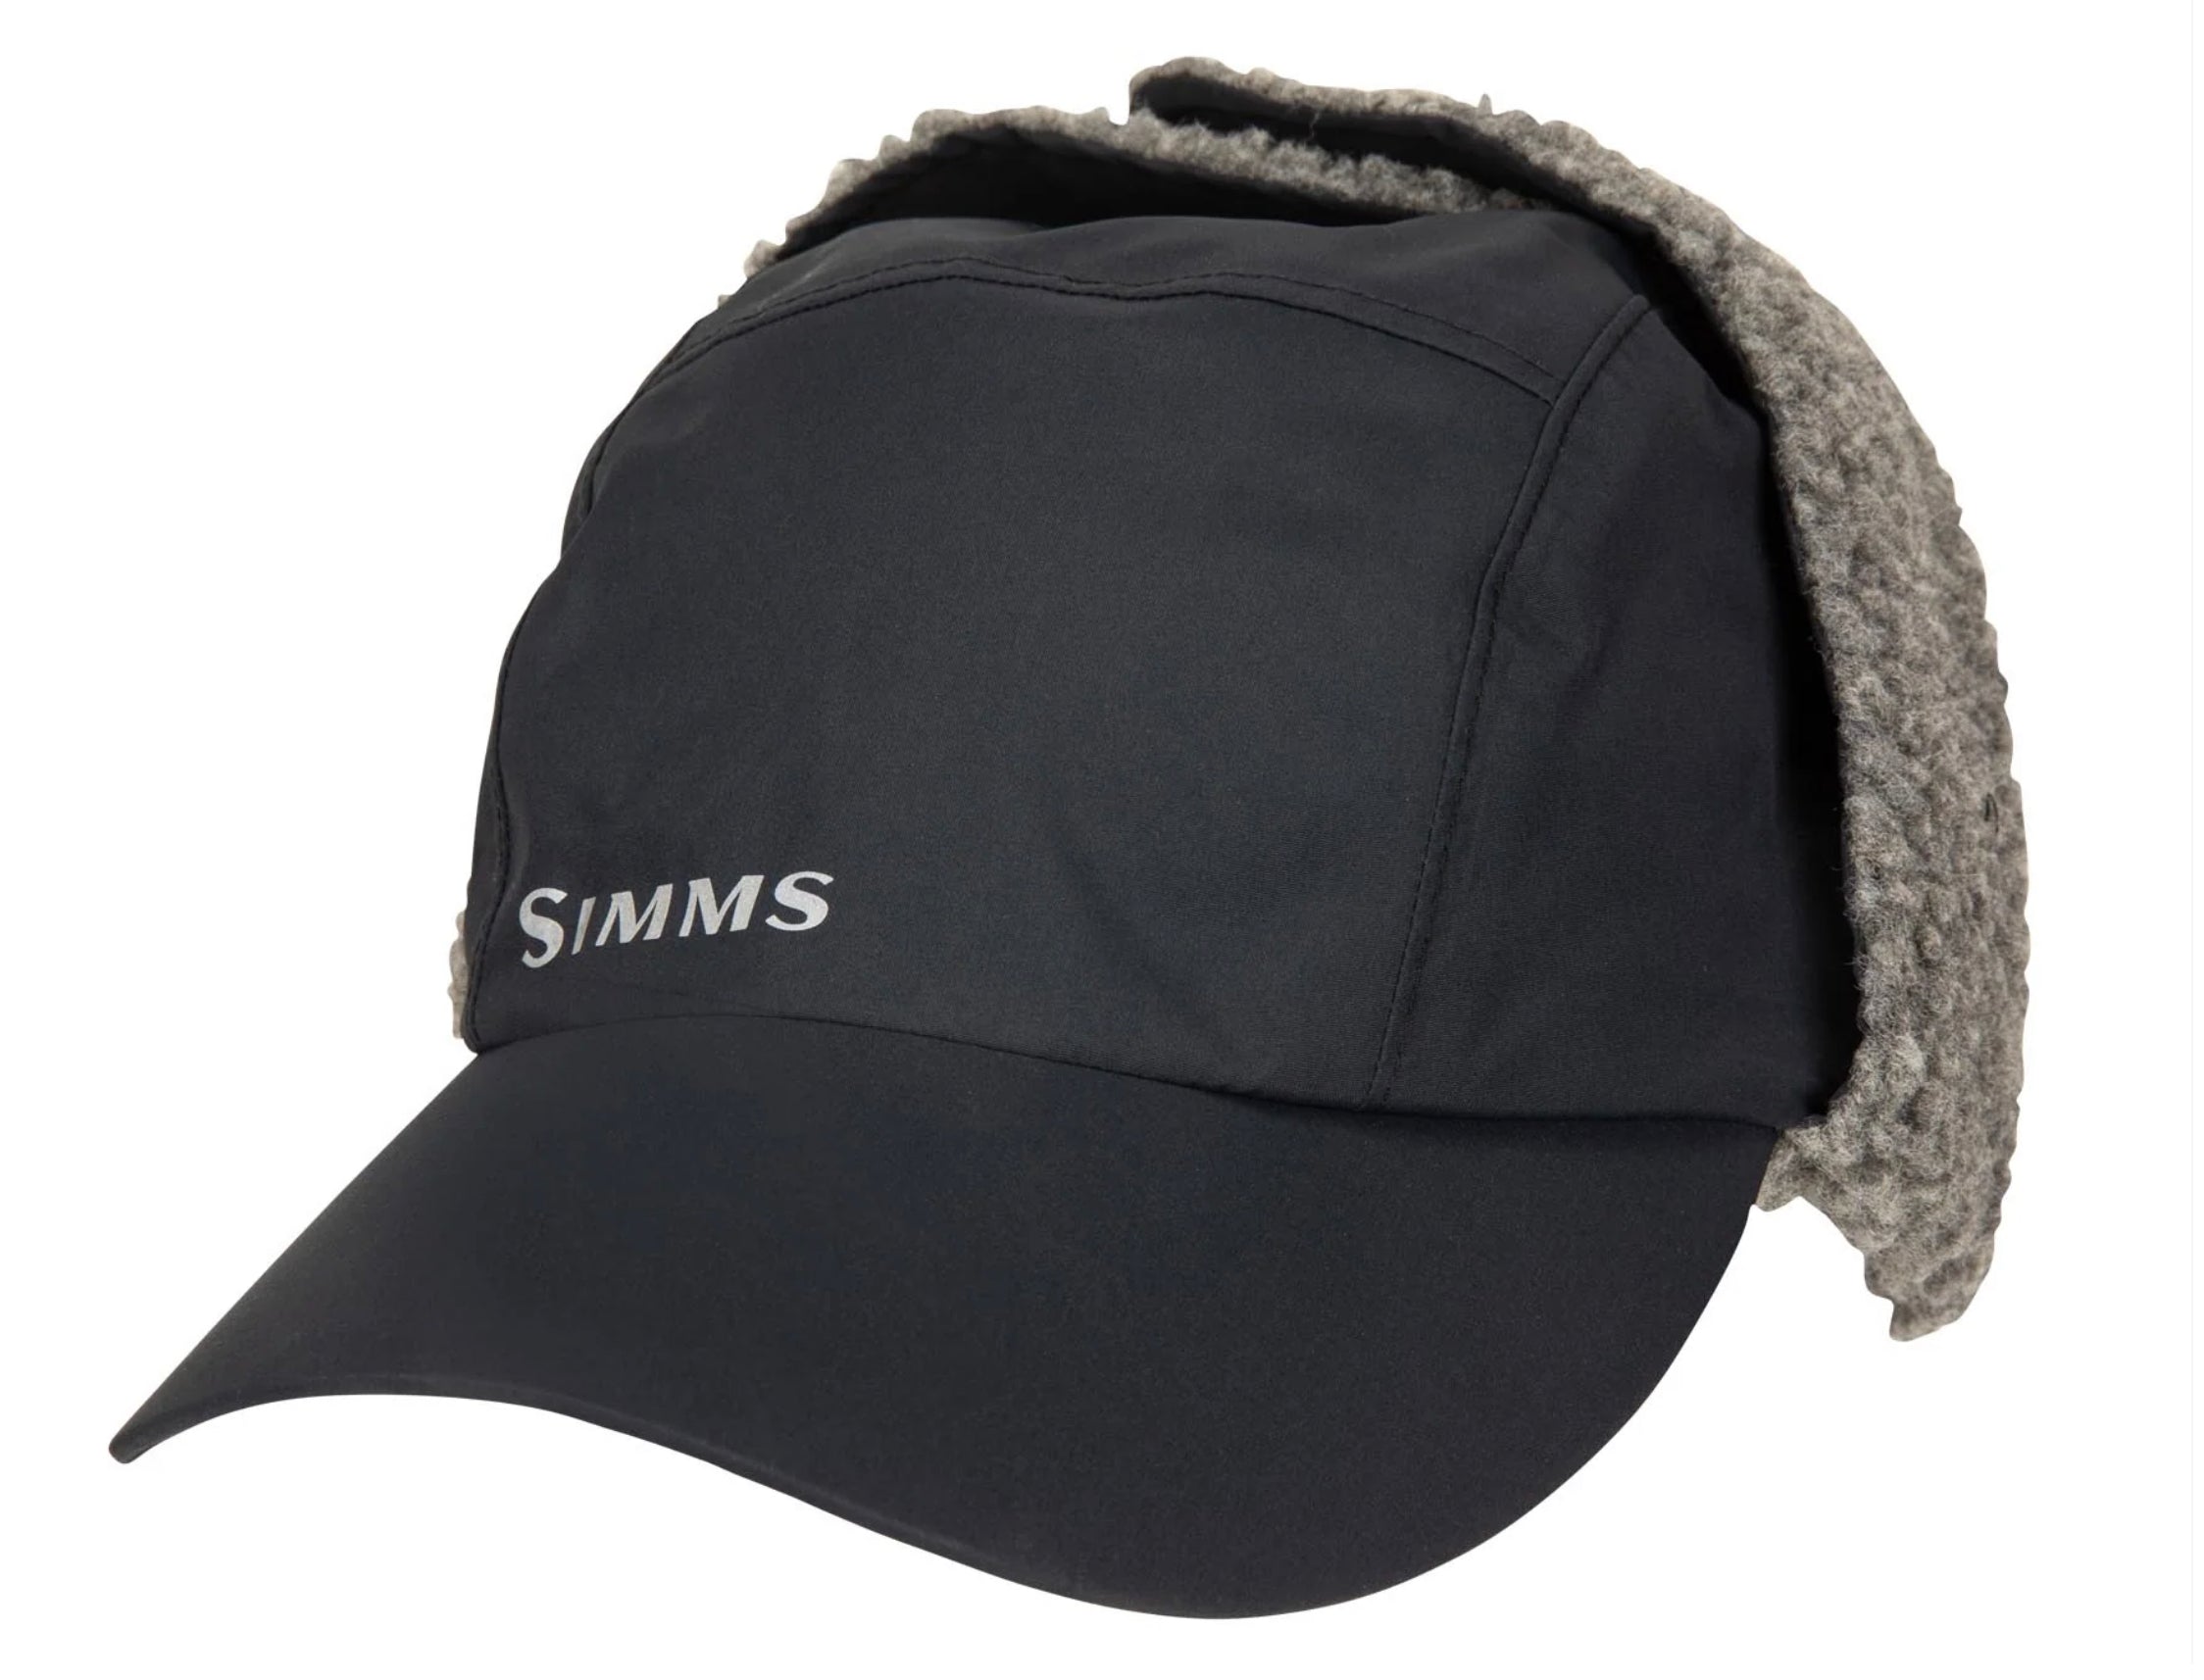 Simms Challenger Insulated Hat - Black – Cutthroat Anglers